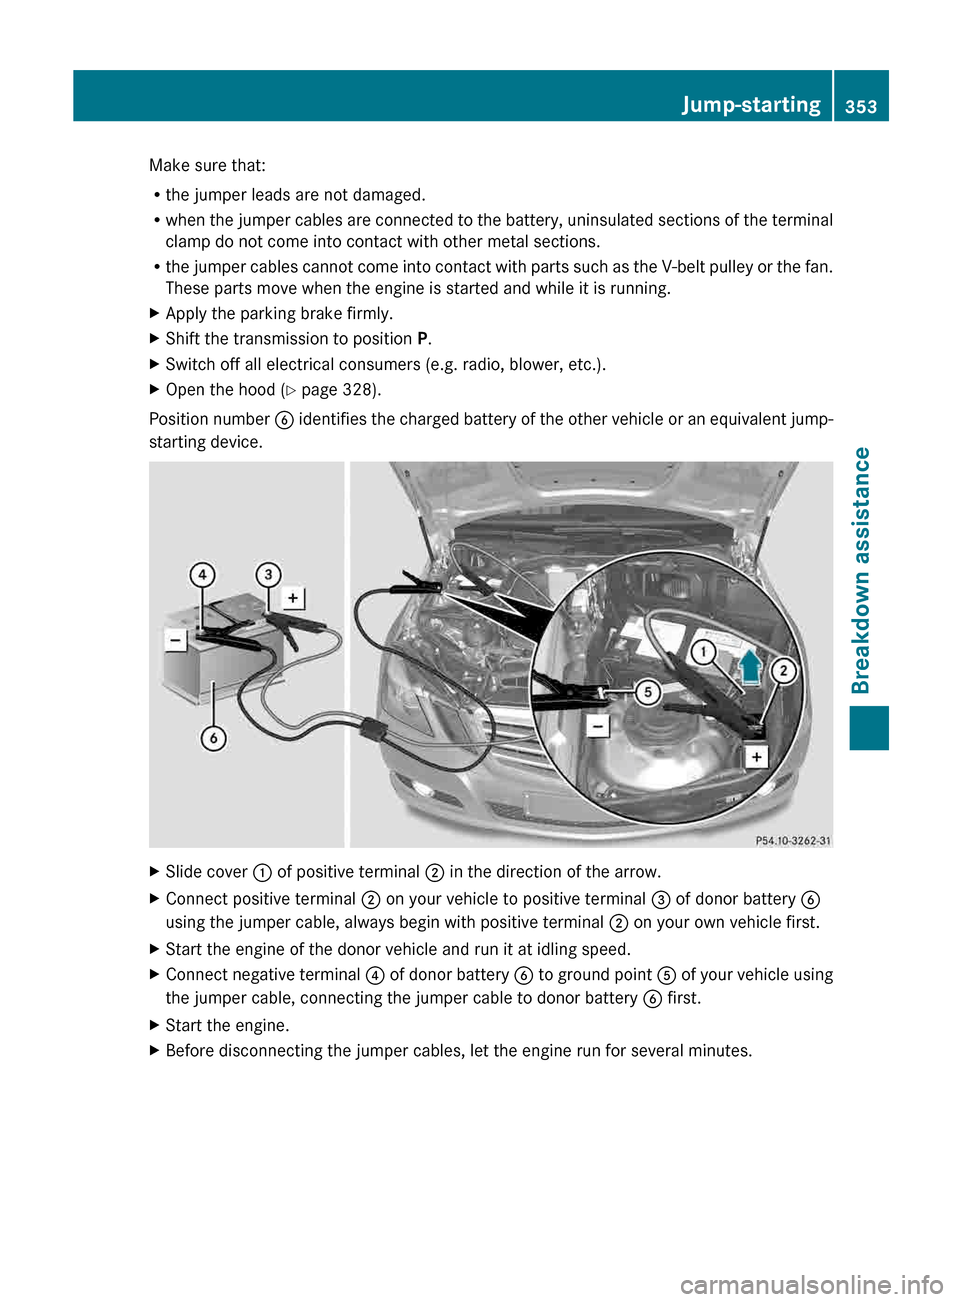 MERCEDES-BENZ E-Class SEDAN 2013 W212 User Guide Make sure that:
R
the jumper leads are not damaged.
R when 
the jumper cables are connected to the battery, uninsulated sections of the terminal
clamp do not come into contact with other metal section